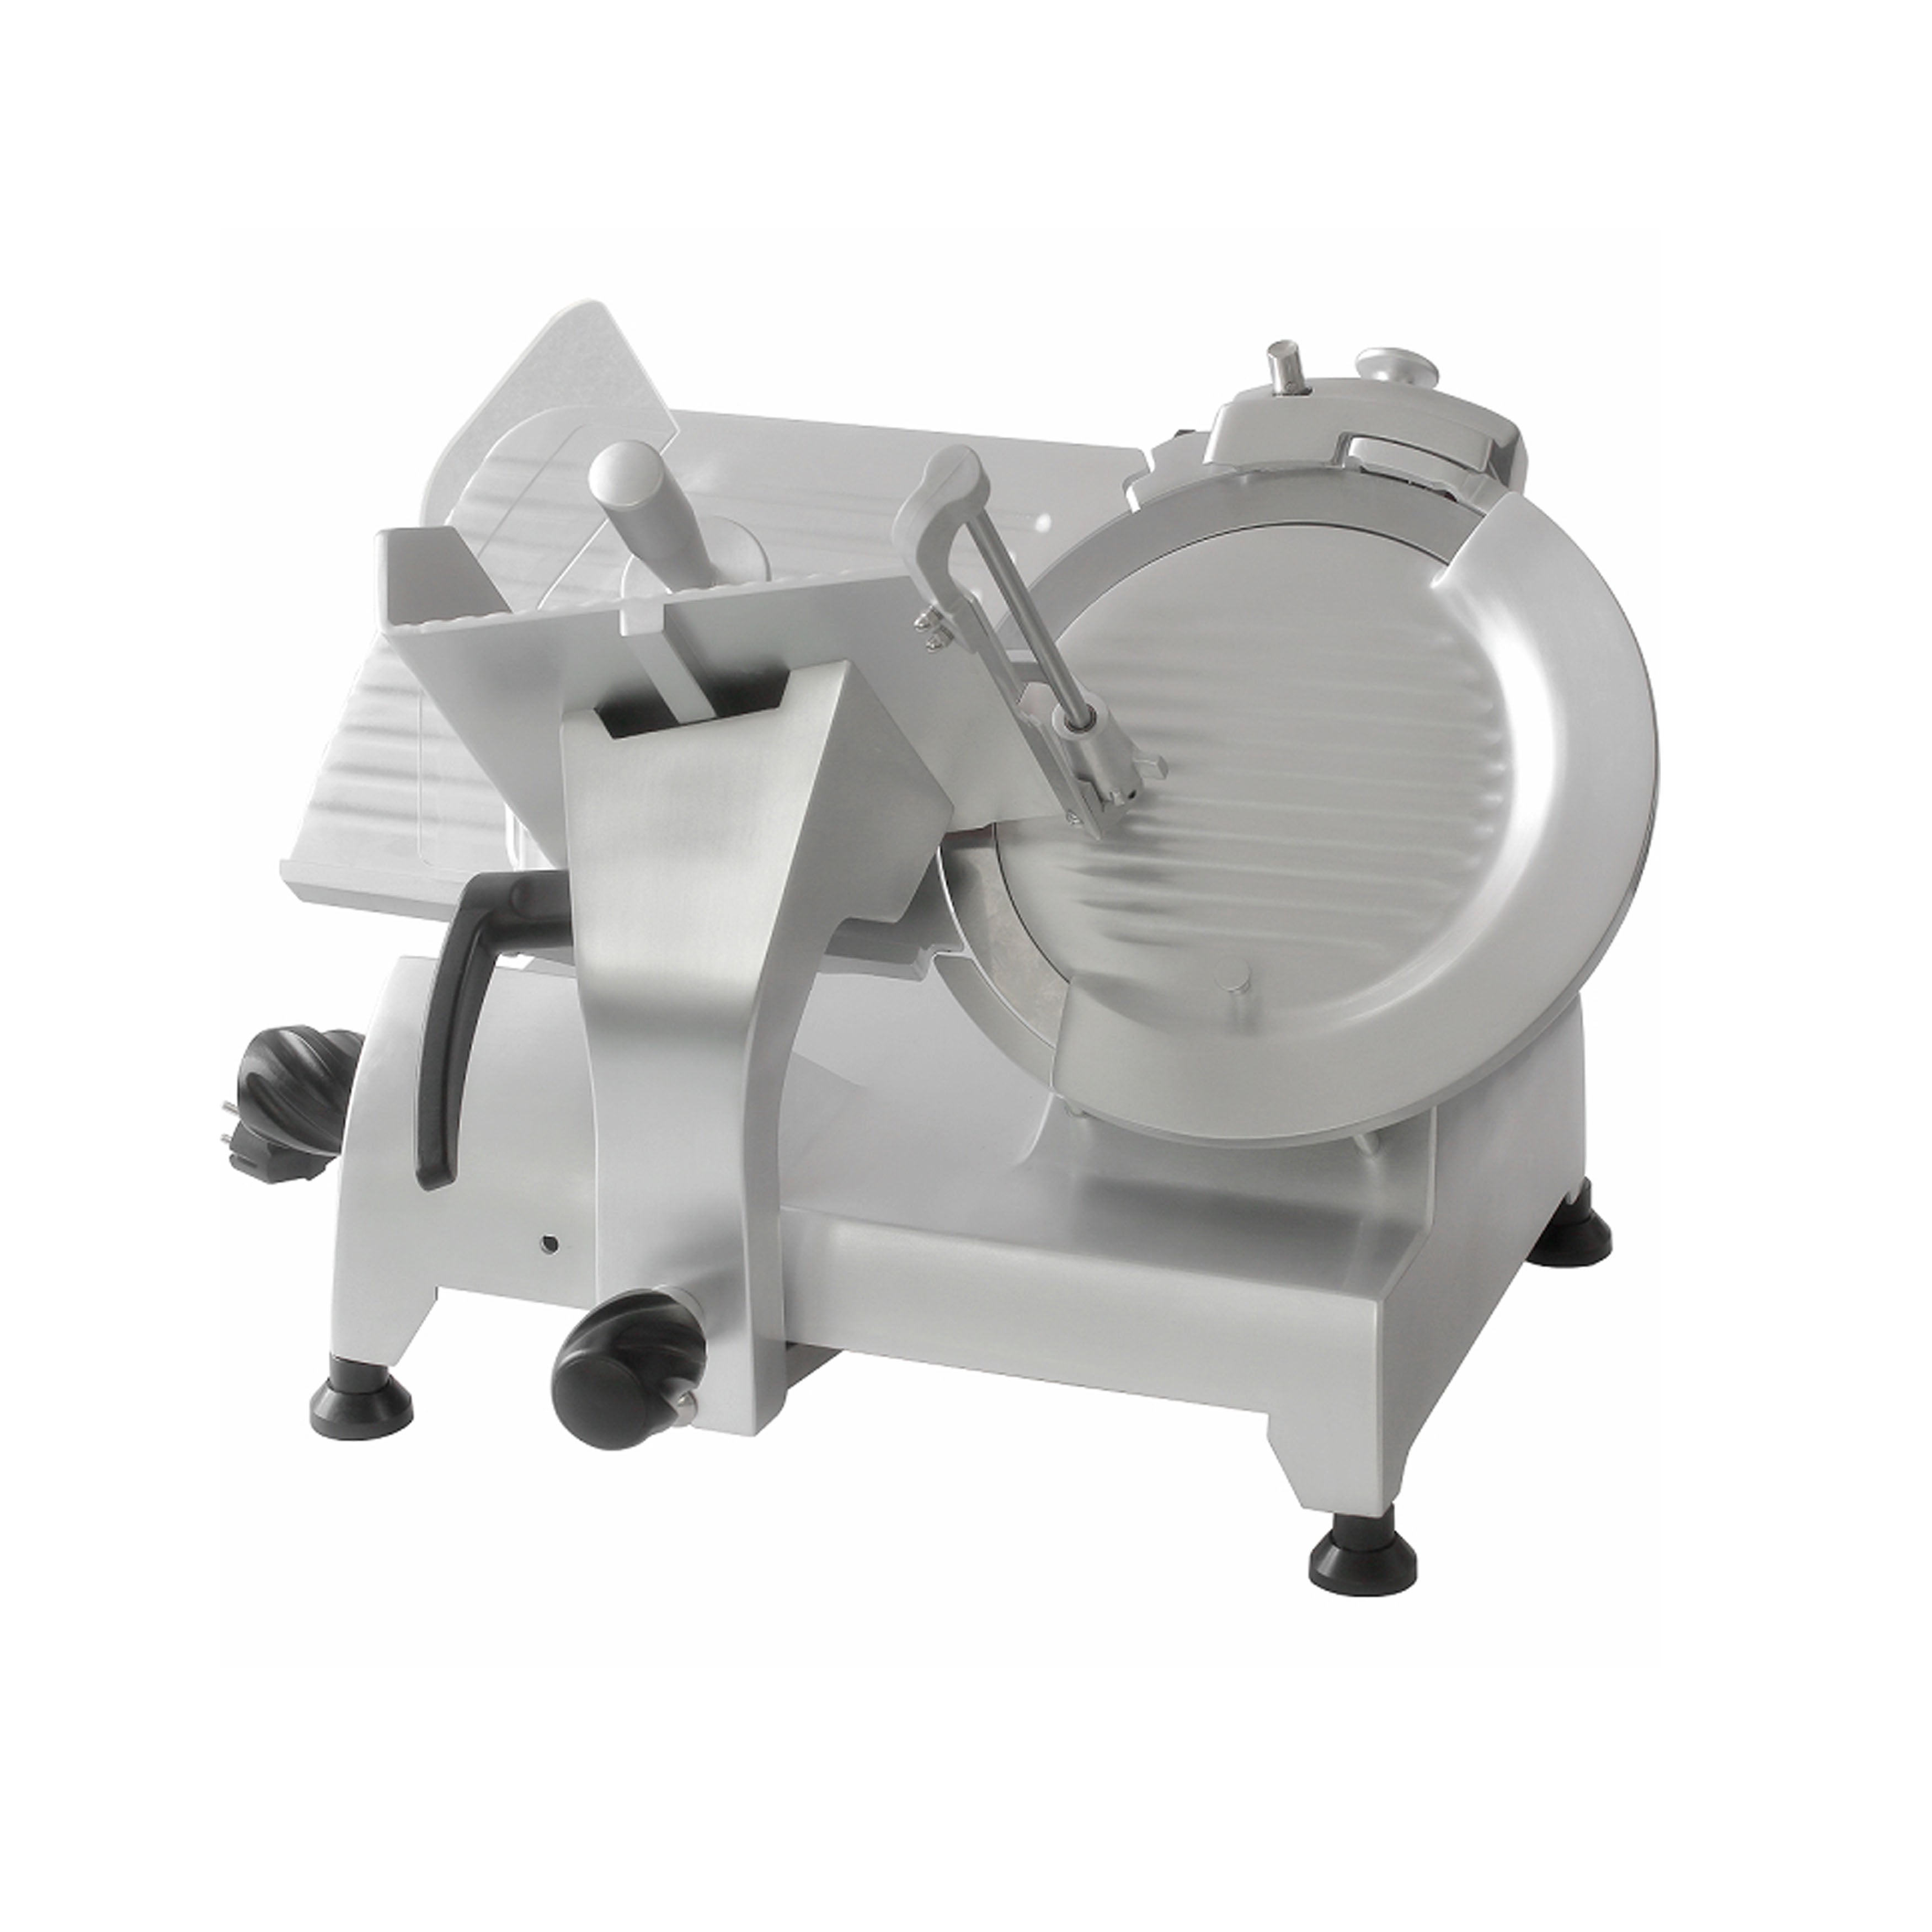 Paladin - 1A-FS405, Commercial 12'' Heavy Duty Manual Feed Meat Slicer